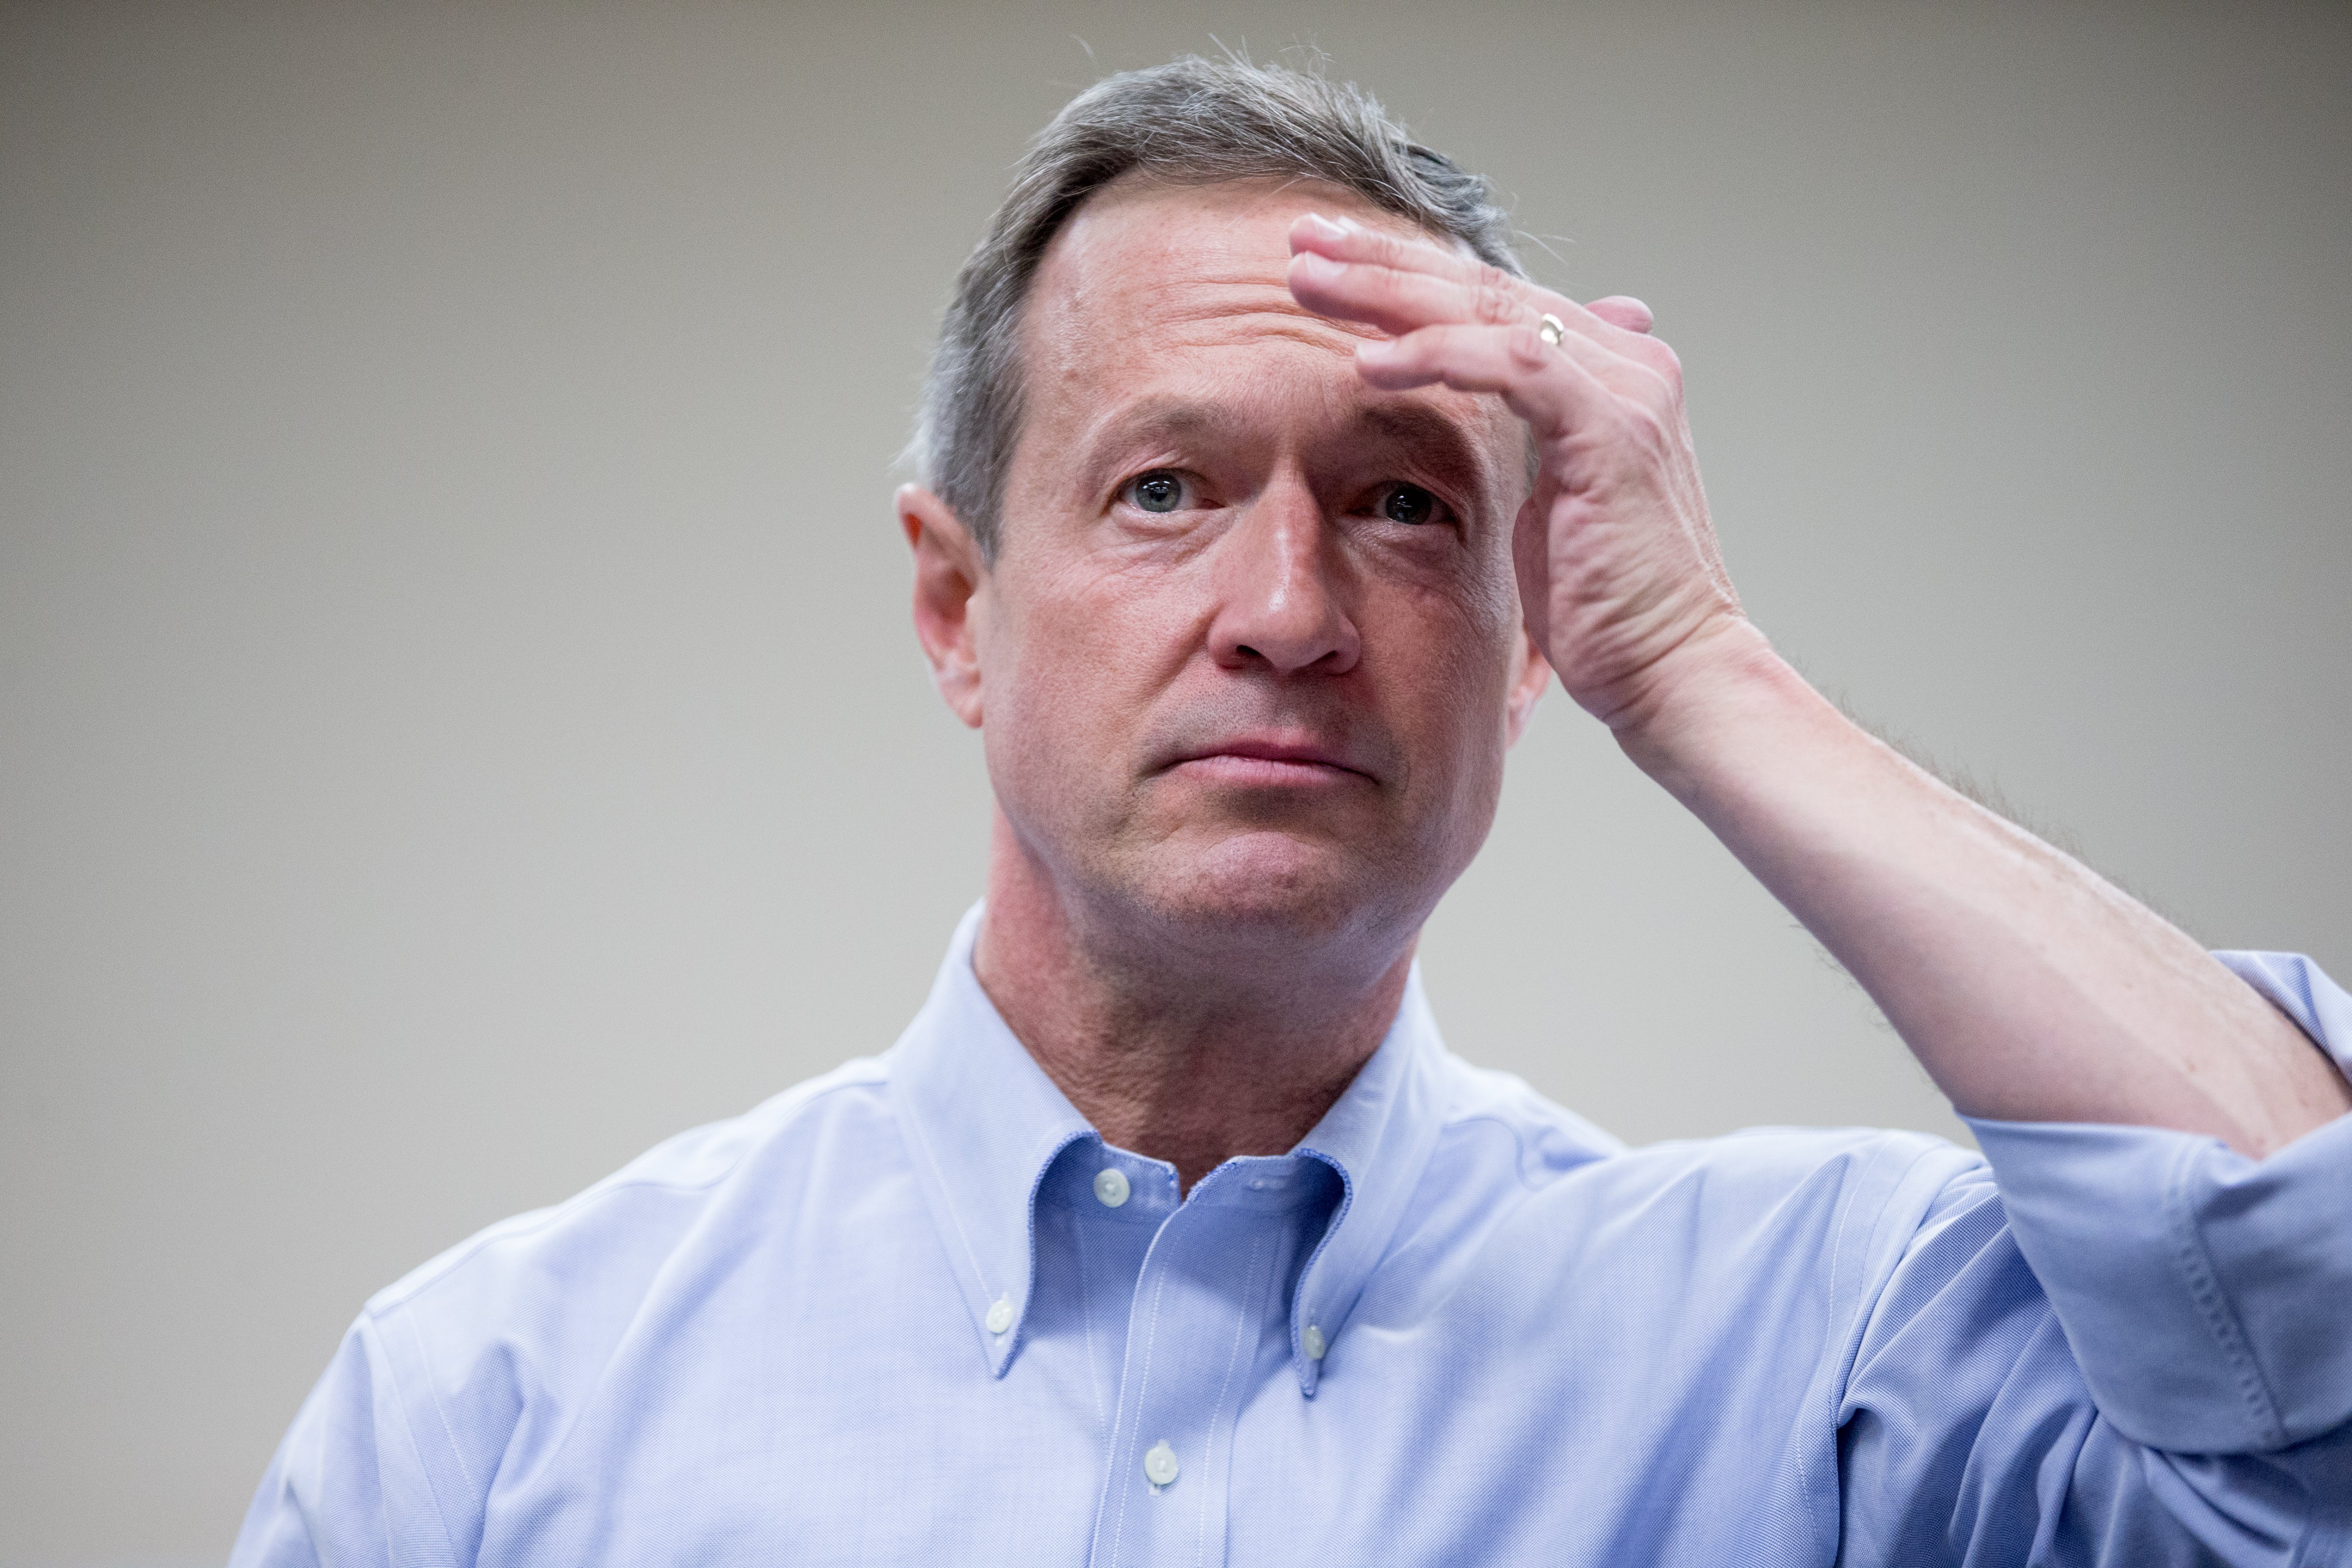 Democratic presidential candidate, former Maryland Gov. Martin O'Malley pauses as he speaks at the West Des Moines Public Library in West Des Moines, Iowa, Saturday, Jan. 2, 2016. (Andrew Harnik—AP)